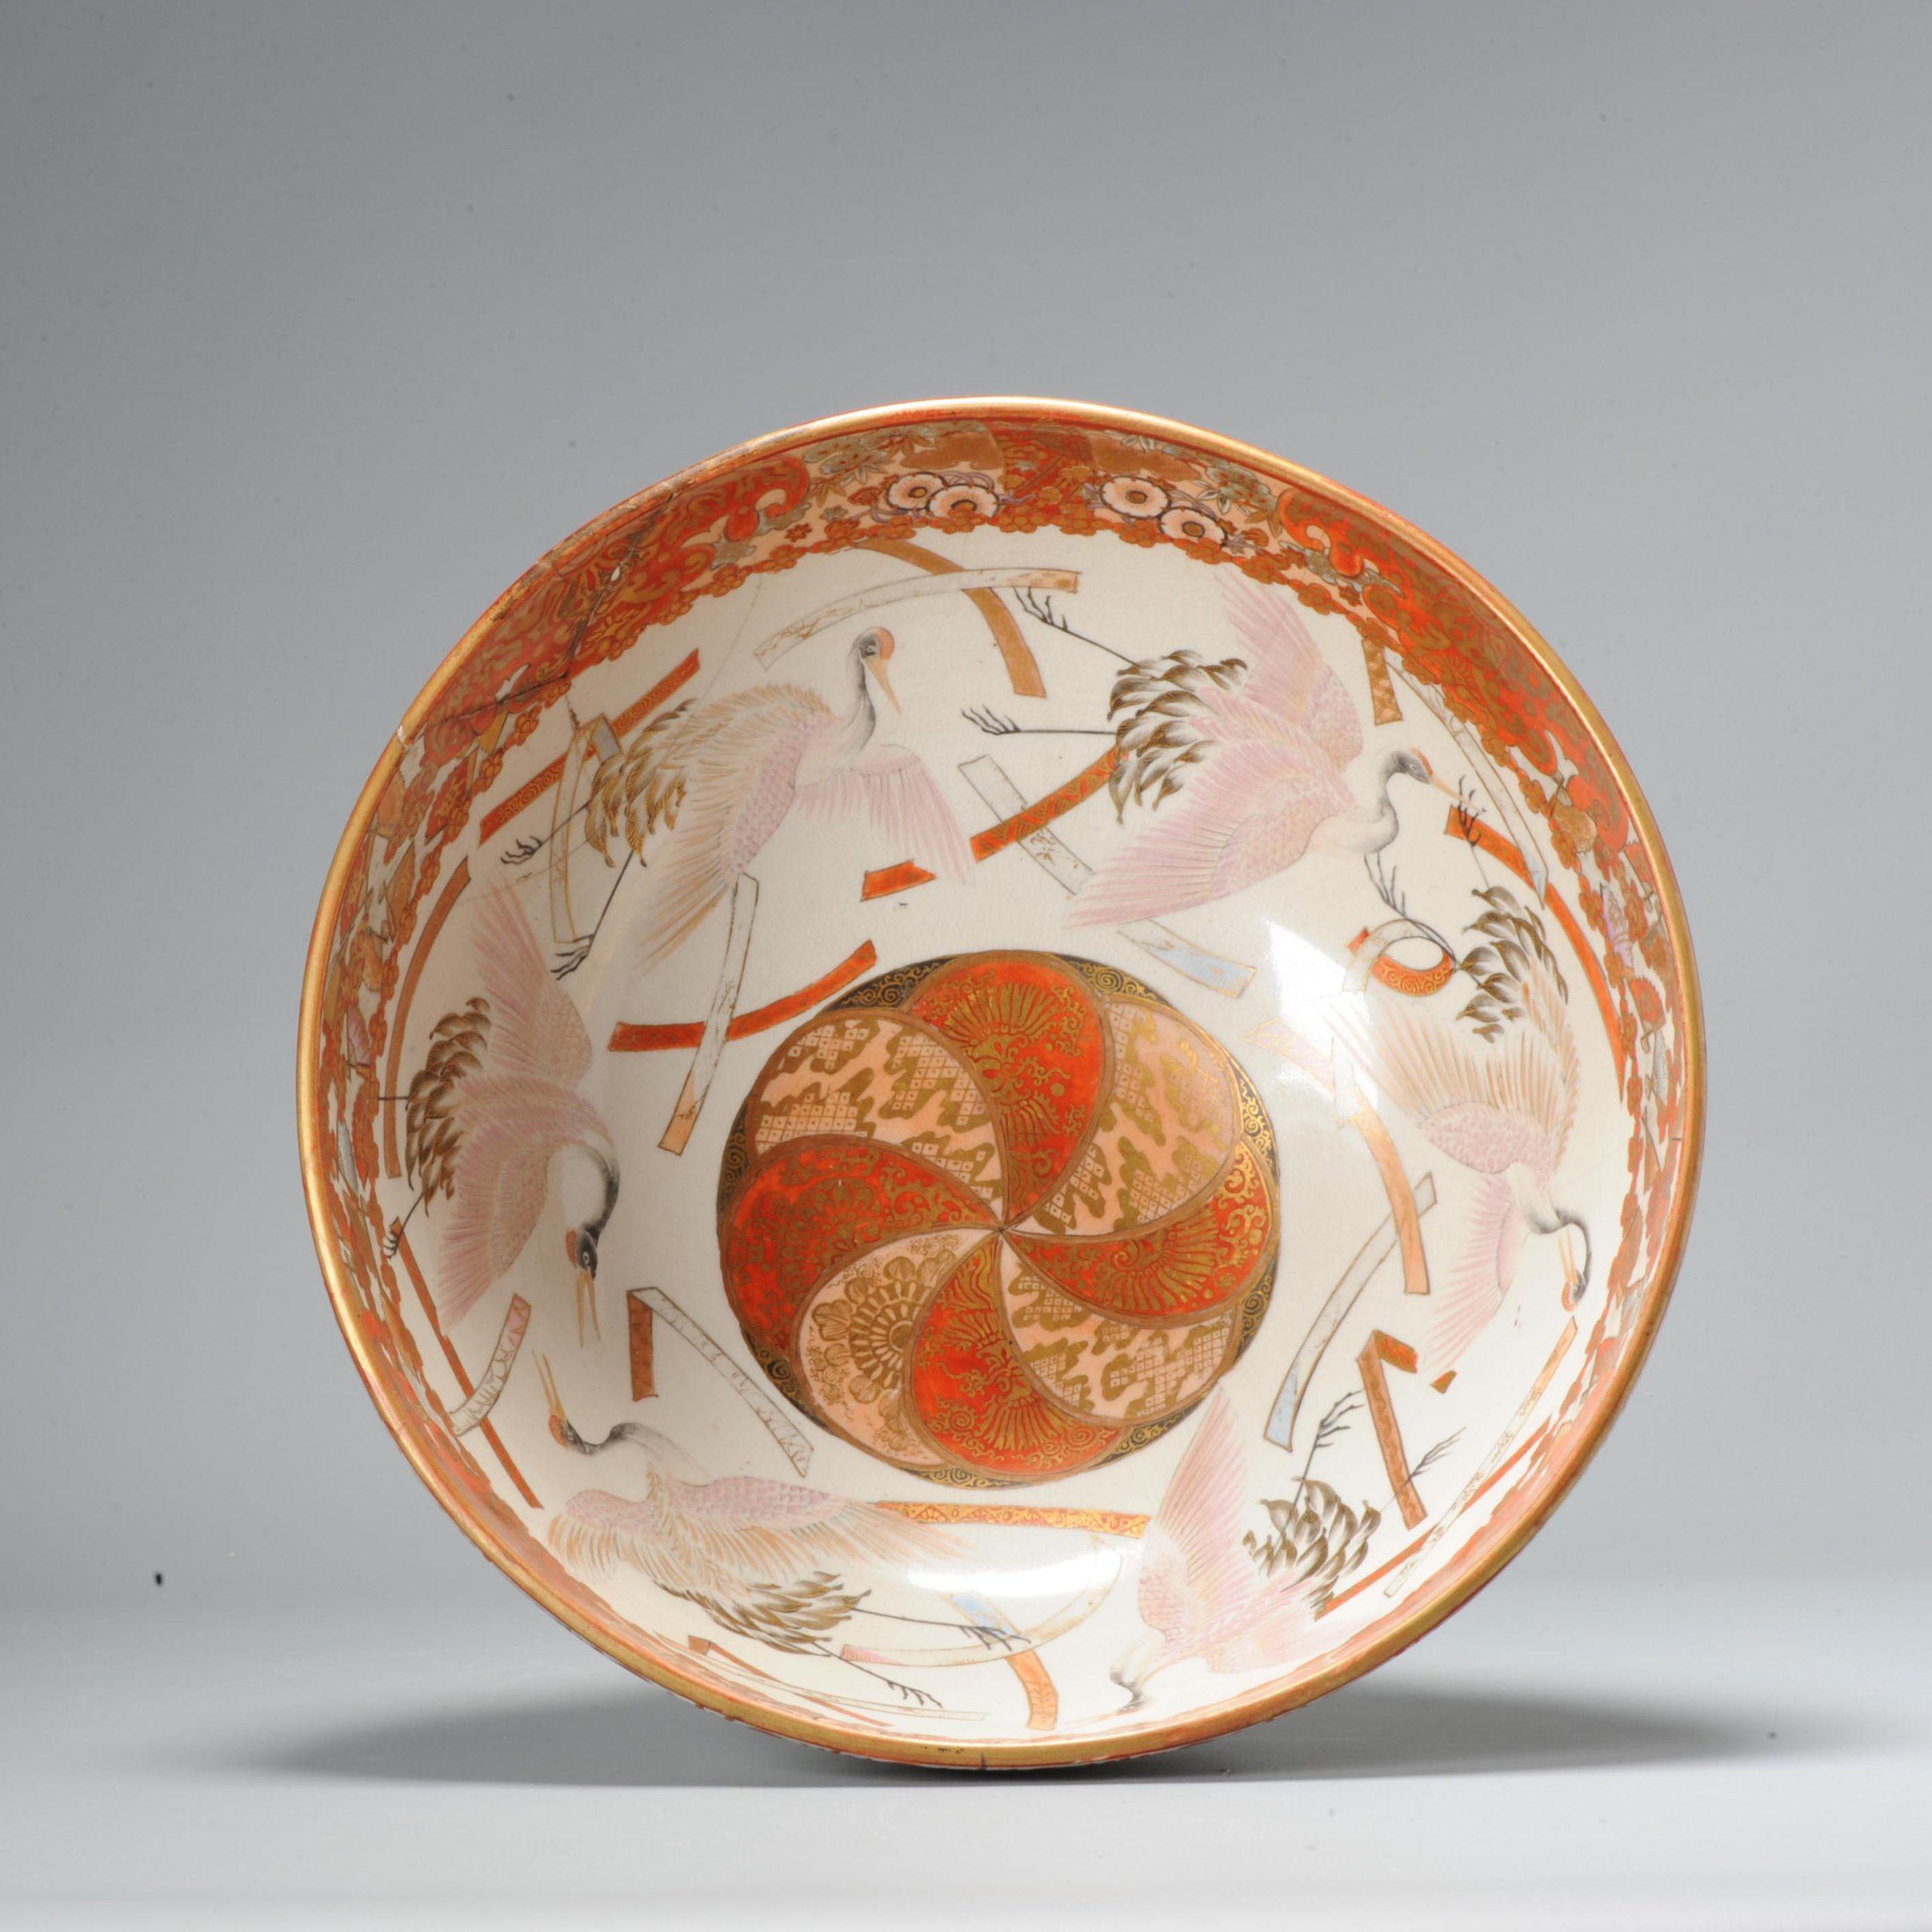 Lovely piece with beautiful scene in kutani colors. Really top quality in its sort. With mark at the base.

Additional information:
Material: Porcelain & Pottery
Japanese Style: Kutani
Region of Origin: Japan
Period: 19th century Meiji Periode